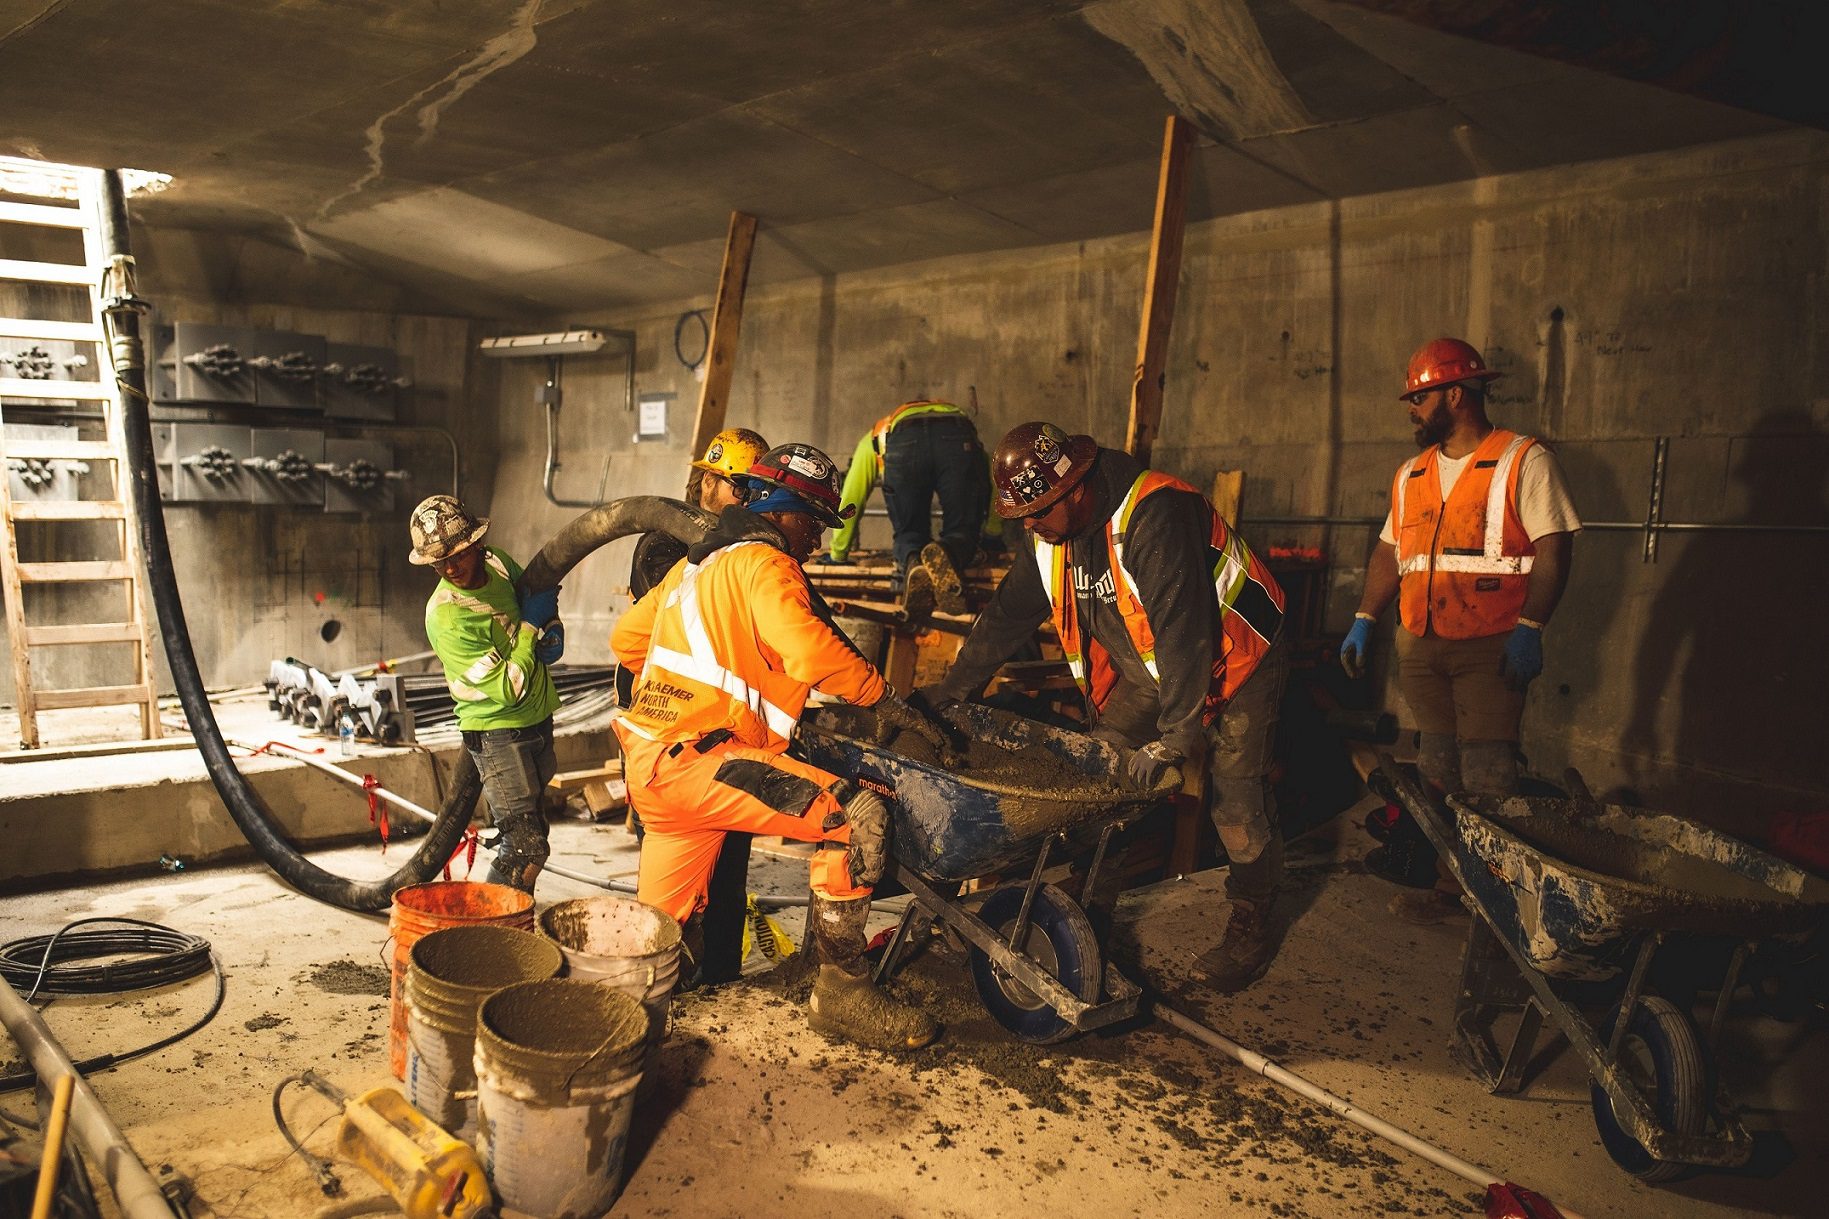 People work inside the West Seattle Bridge to pour structural concrete. Several workers wear personal protective equipment and work to install the concrete.